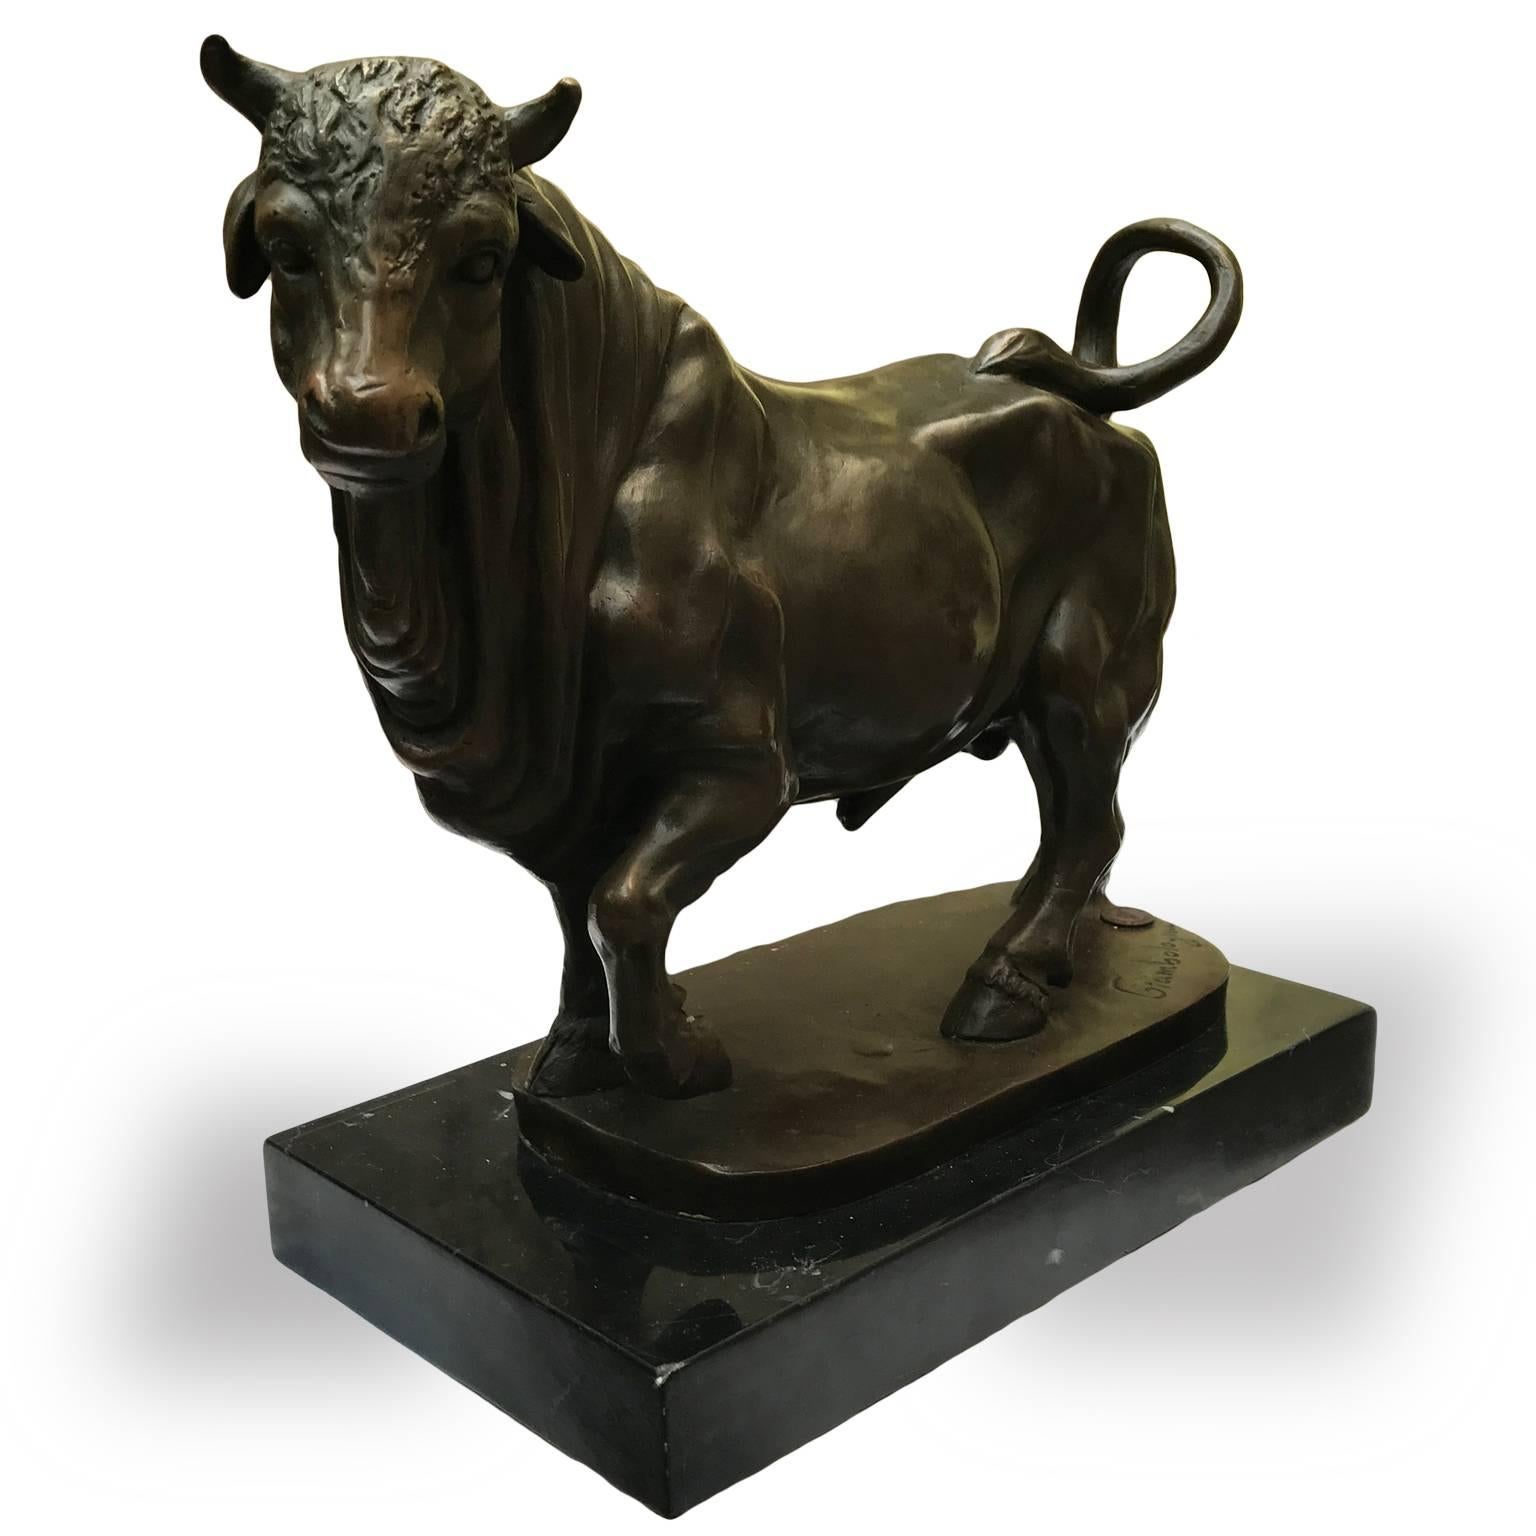 A French bronze casting sculpture of a pacing bull after Giambologna, standing with head to the left and pawing the ground with his left foreleg. Set on a rectangular black marble basement and dating back to 19th century.
Inspired by representations